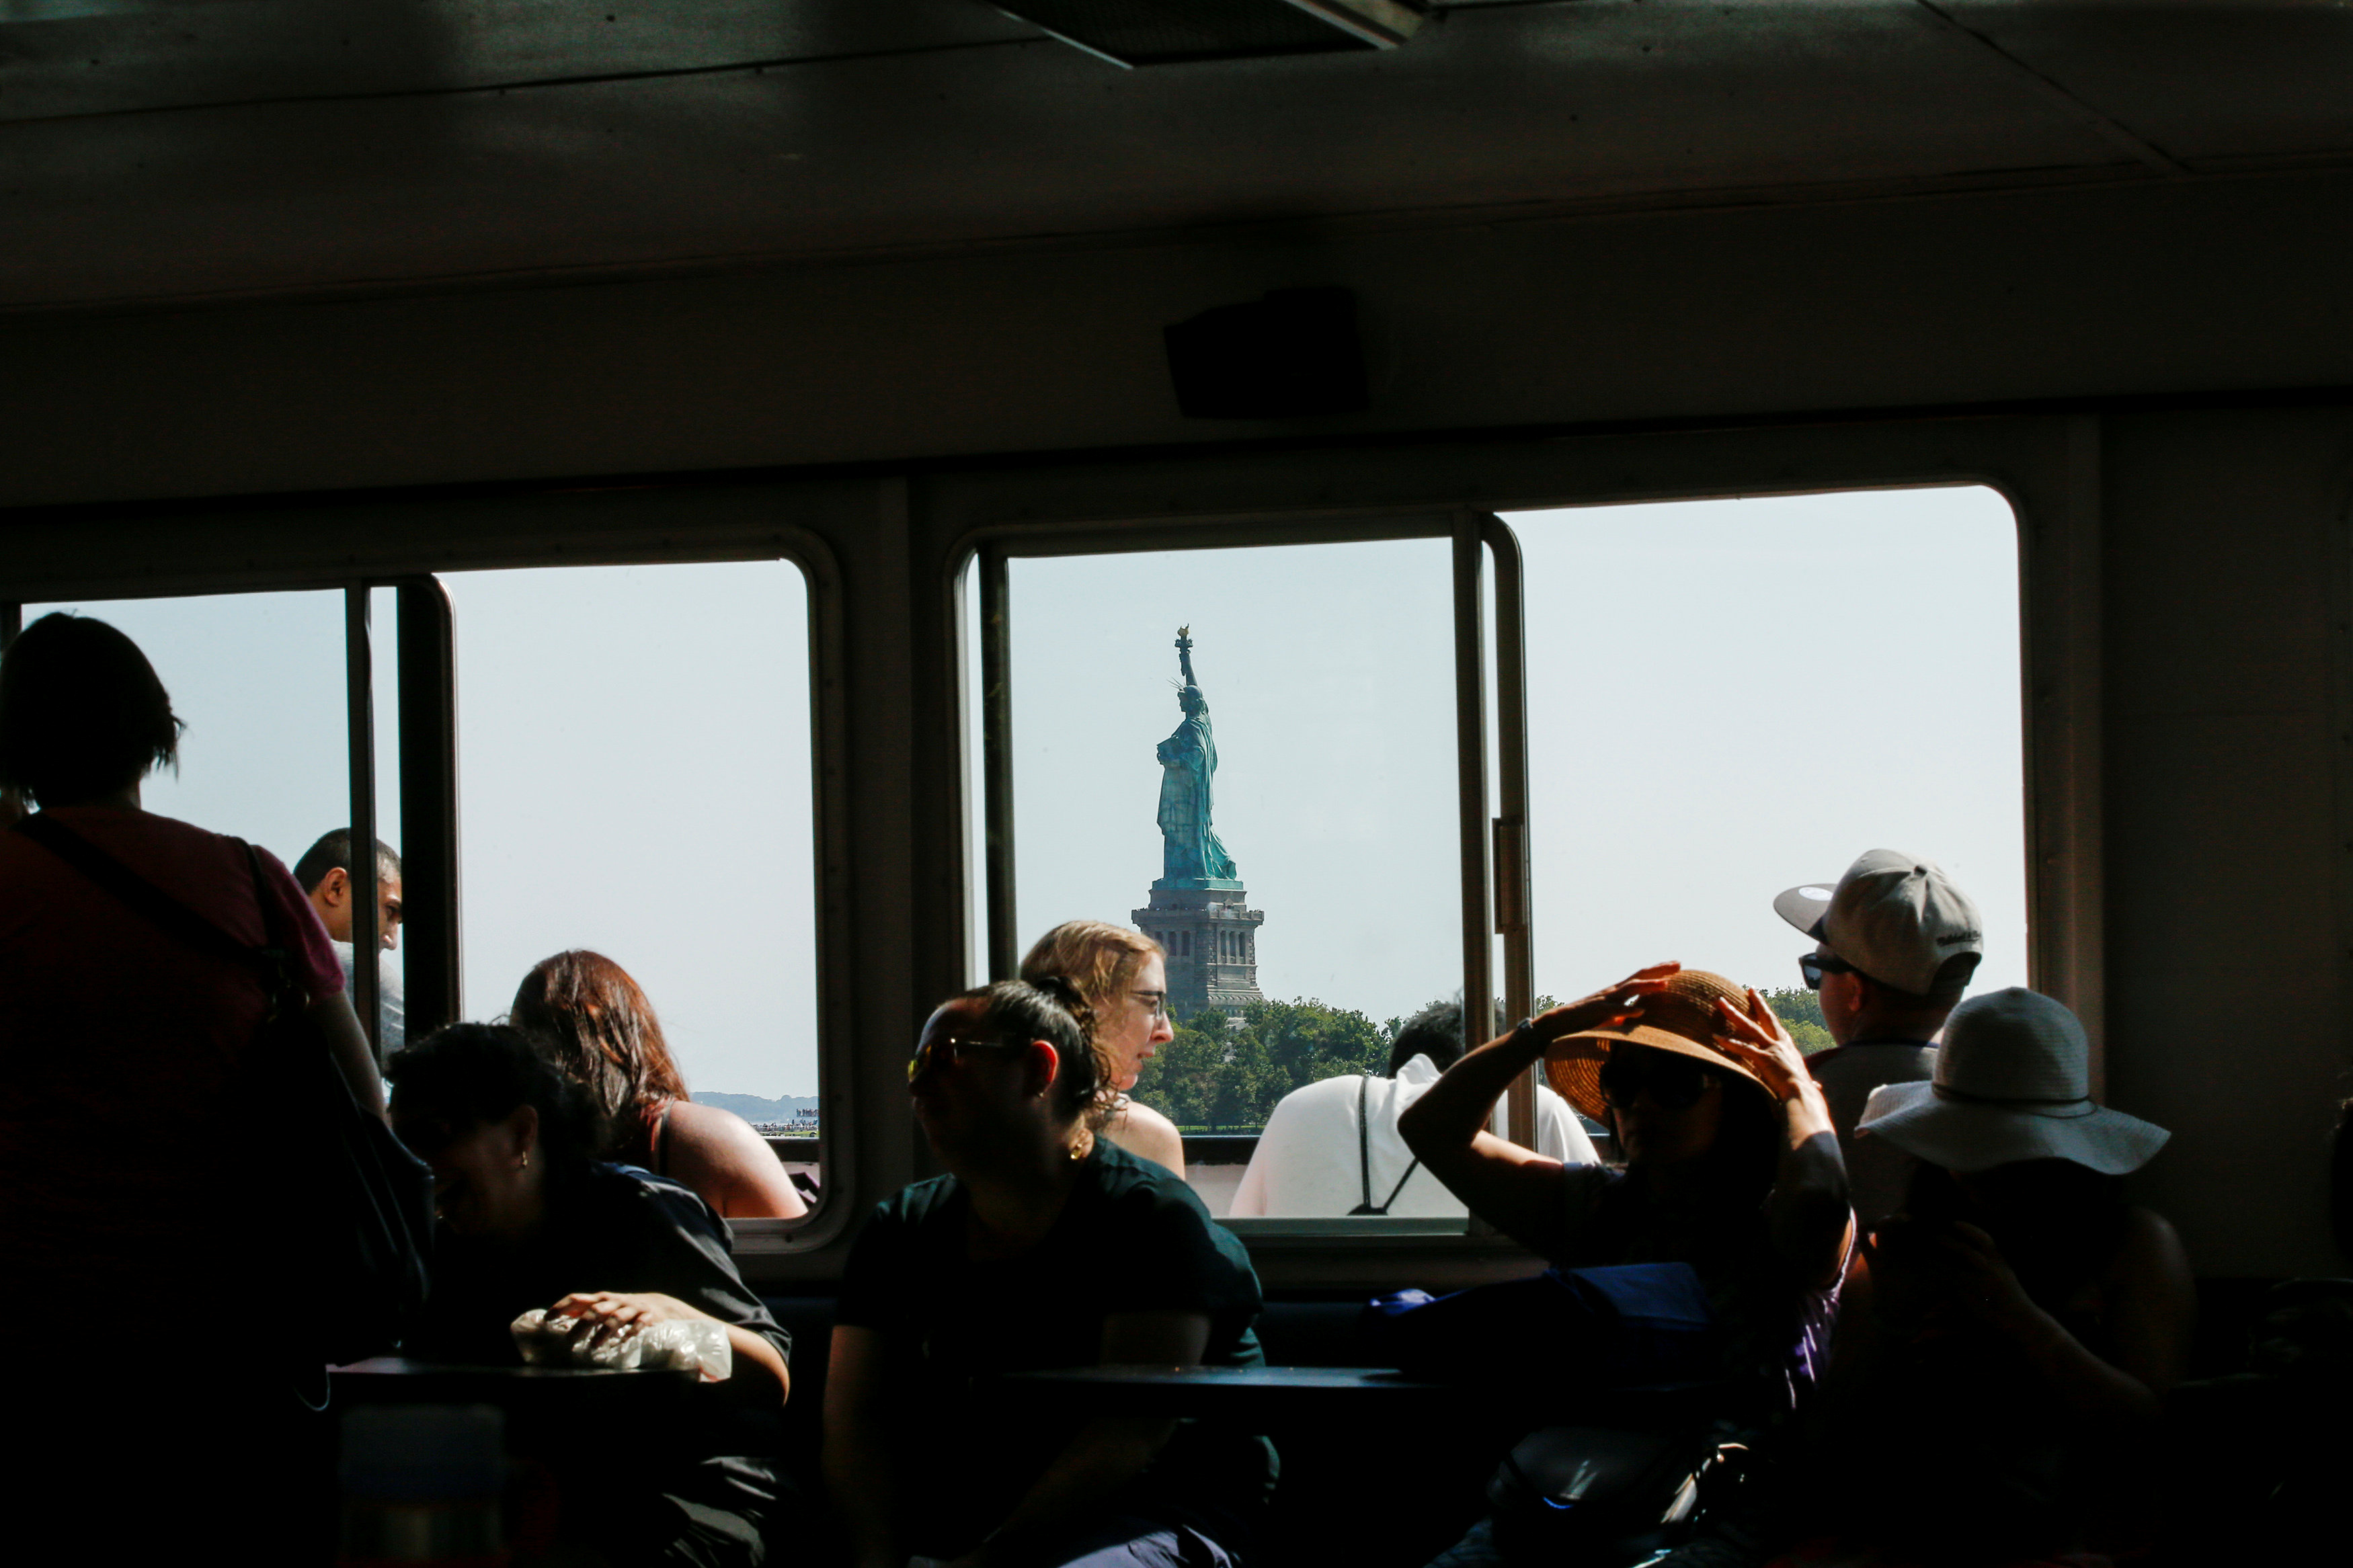 People take the ferry to visit the Liberty State Island in New York